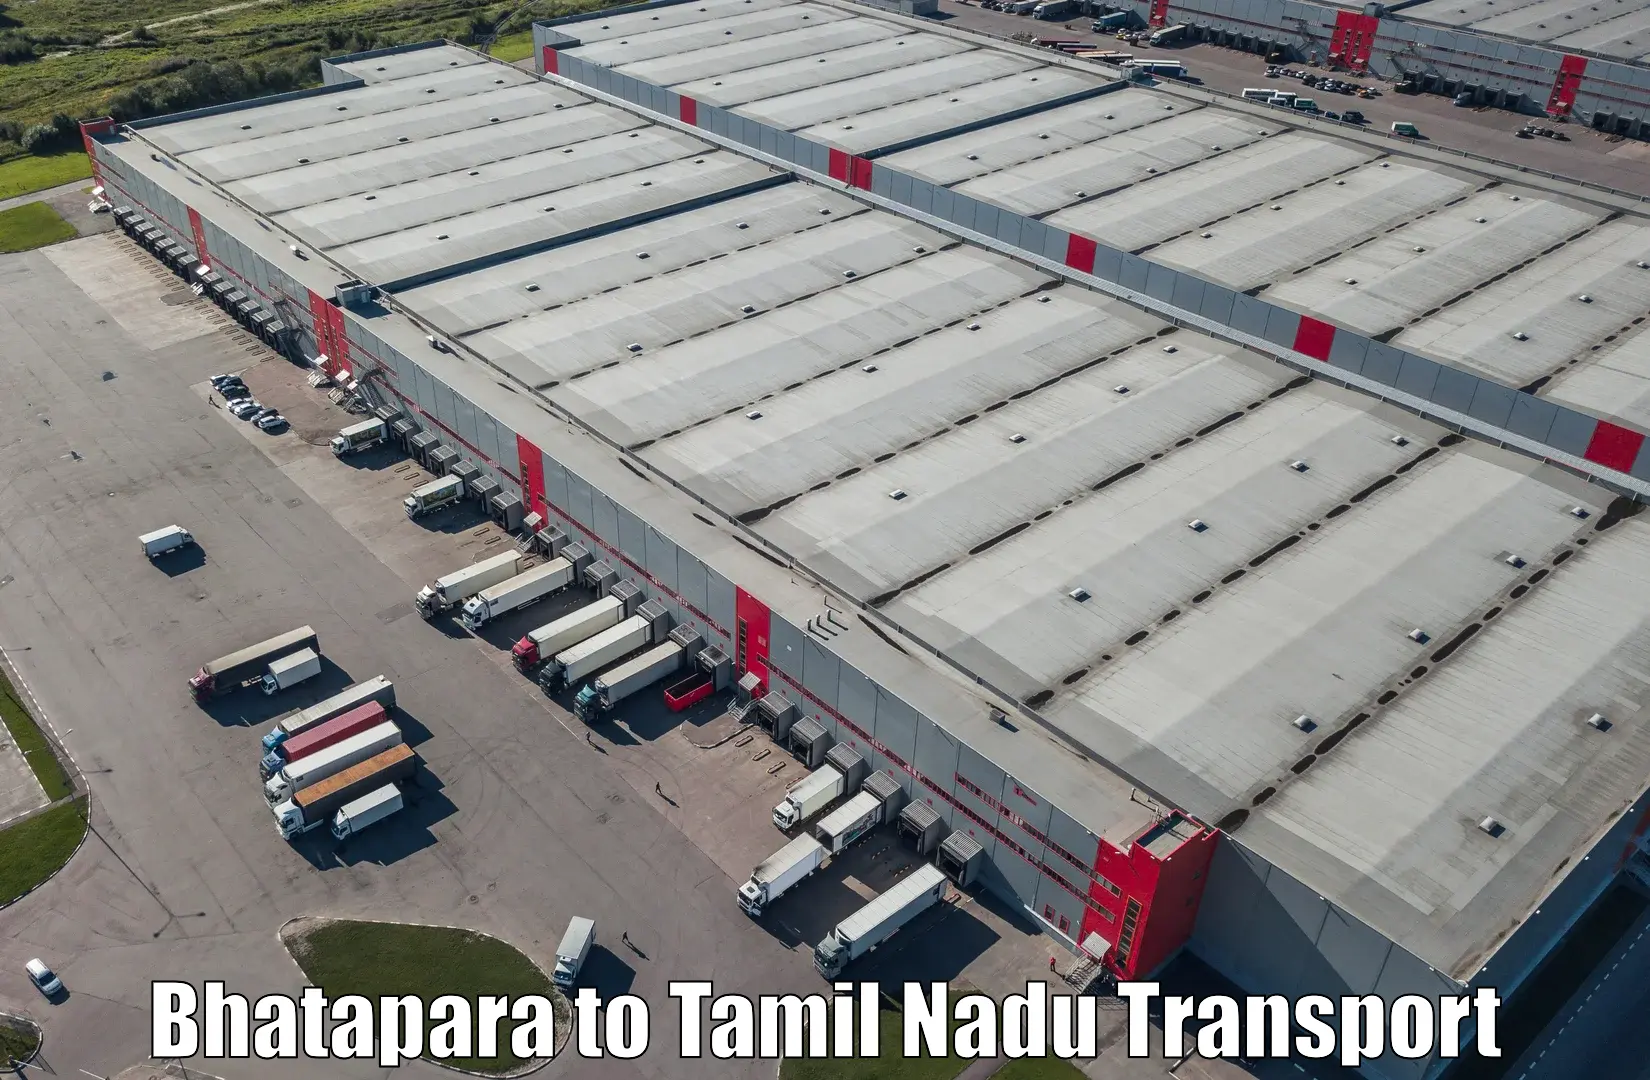 Pick up transport service in Bhatapara to Trichy